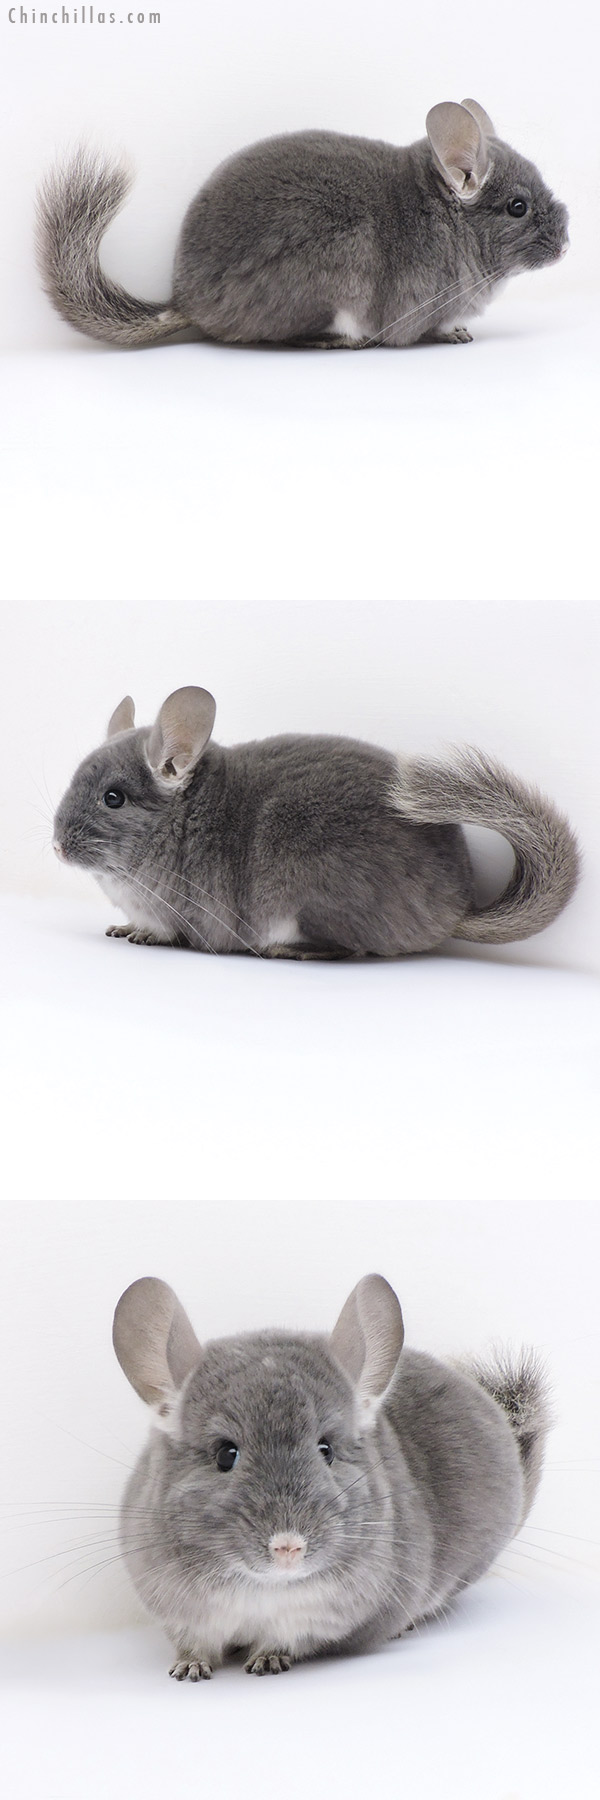 Chinchilla or related item offered for sale or export on Chinchillas.com - 17383 Show Quality TOV Violet ( Ebony Carrier ) Female Chinchilla